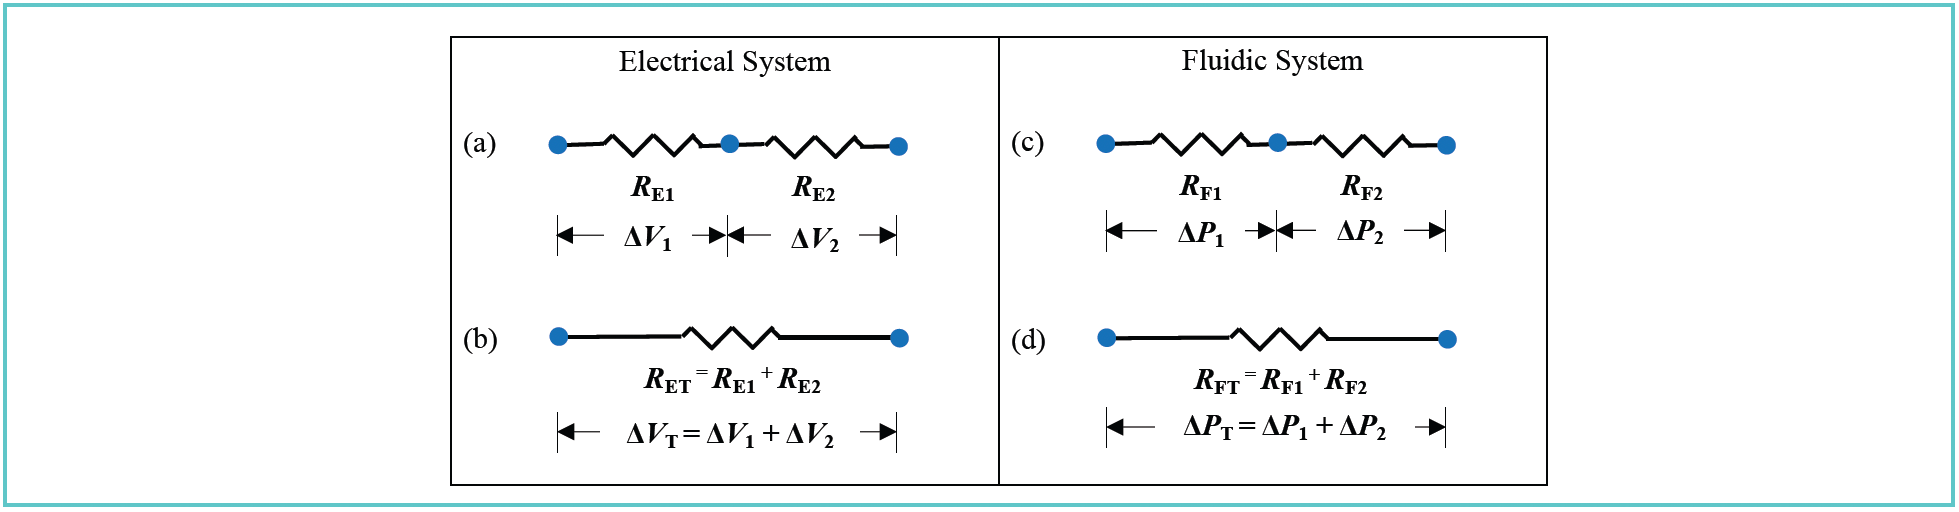 FIGURE 2: Illustration of the relationships between resistances of connected elements in (a,b) electrical systems and (c,d) fluidic systems, as well as the voltage or pressure drops across the elements.